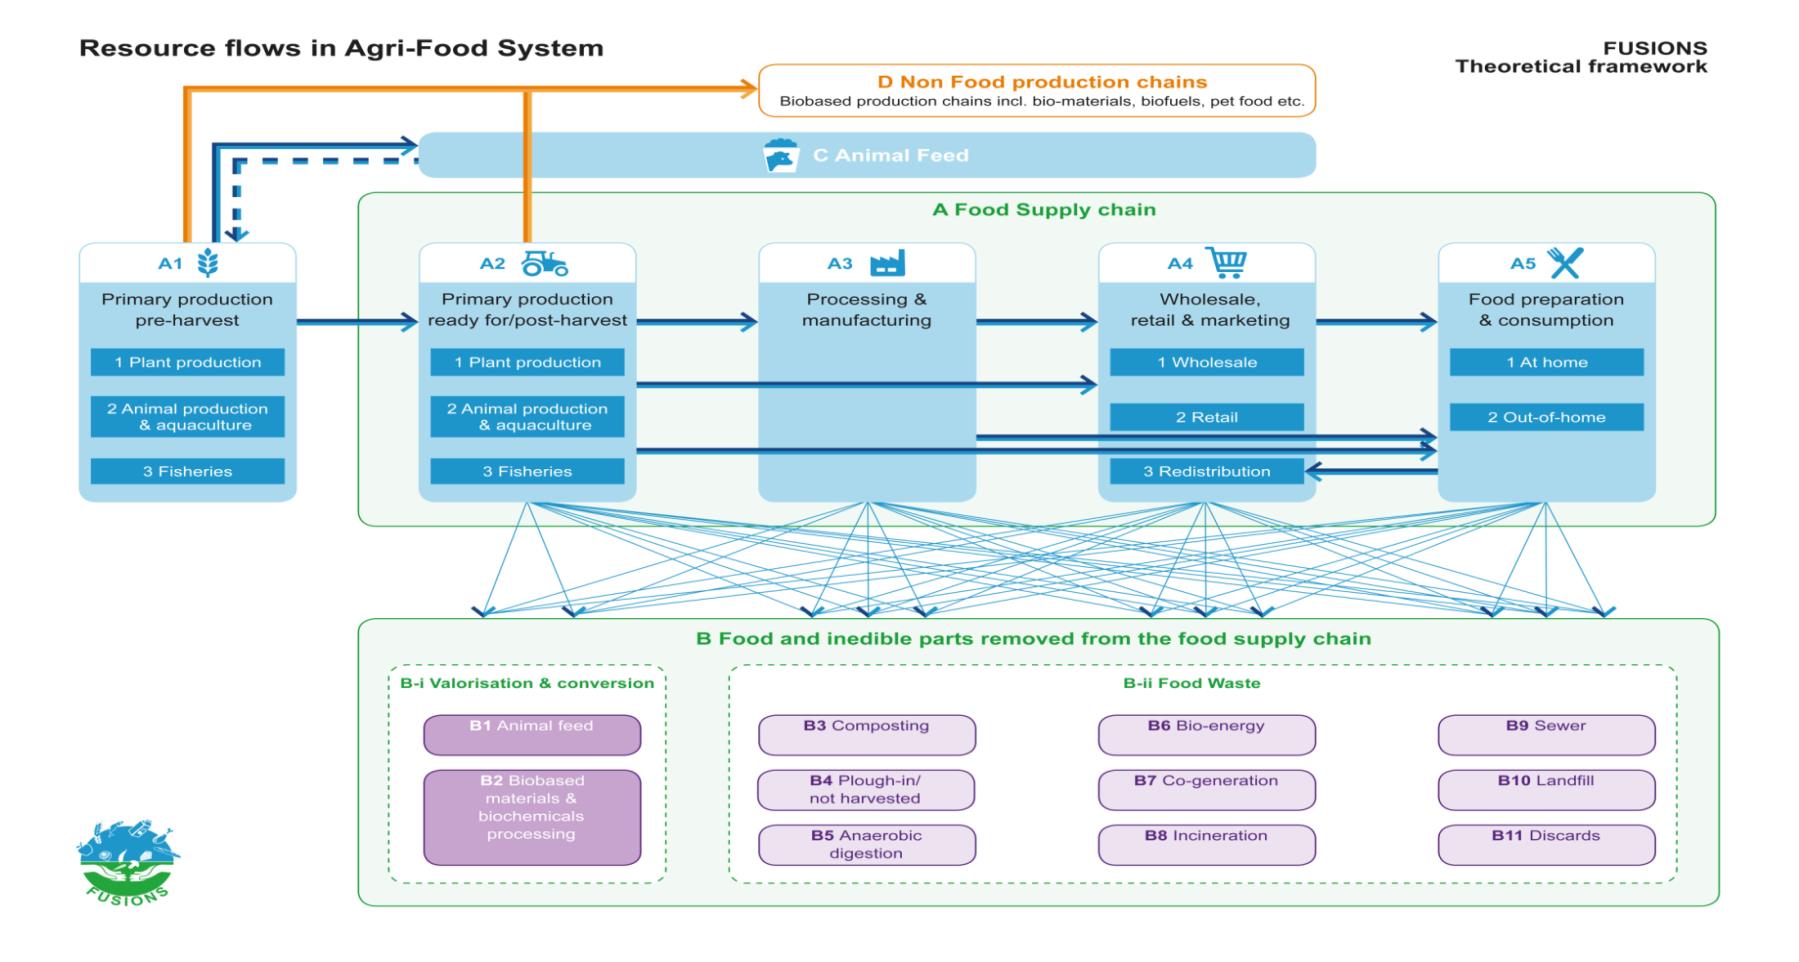 FUSIONS definitional framework Food waste: Any food, and inedible parts of food, removed from the